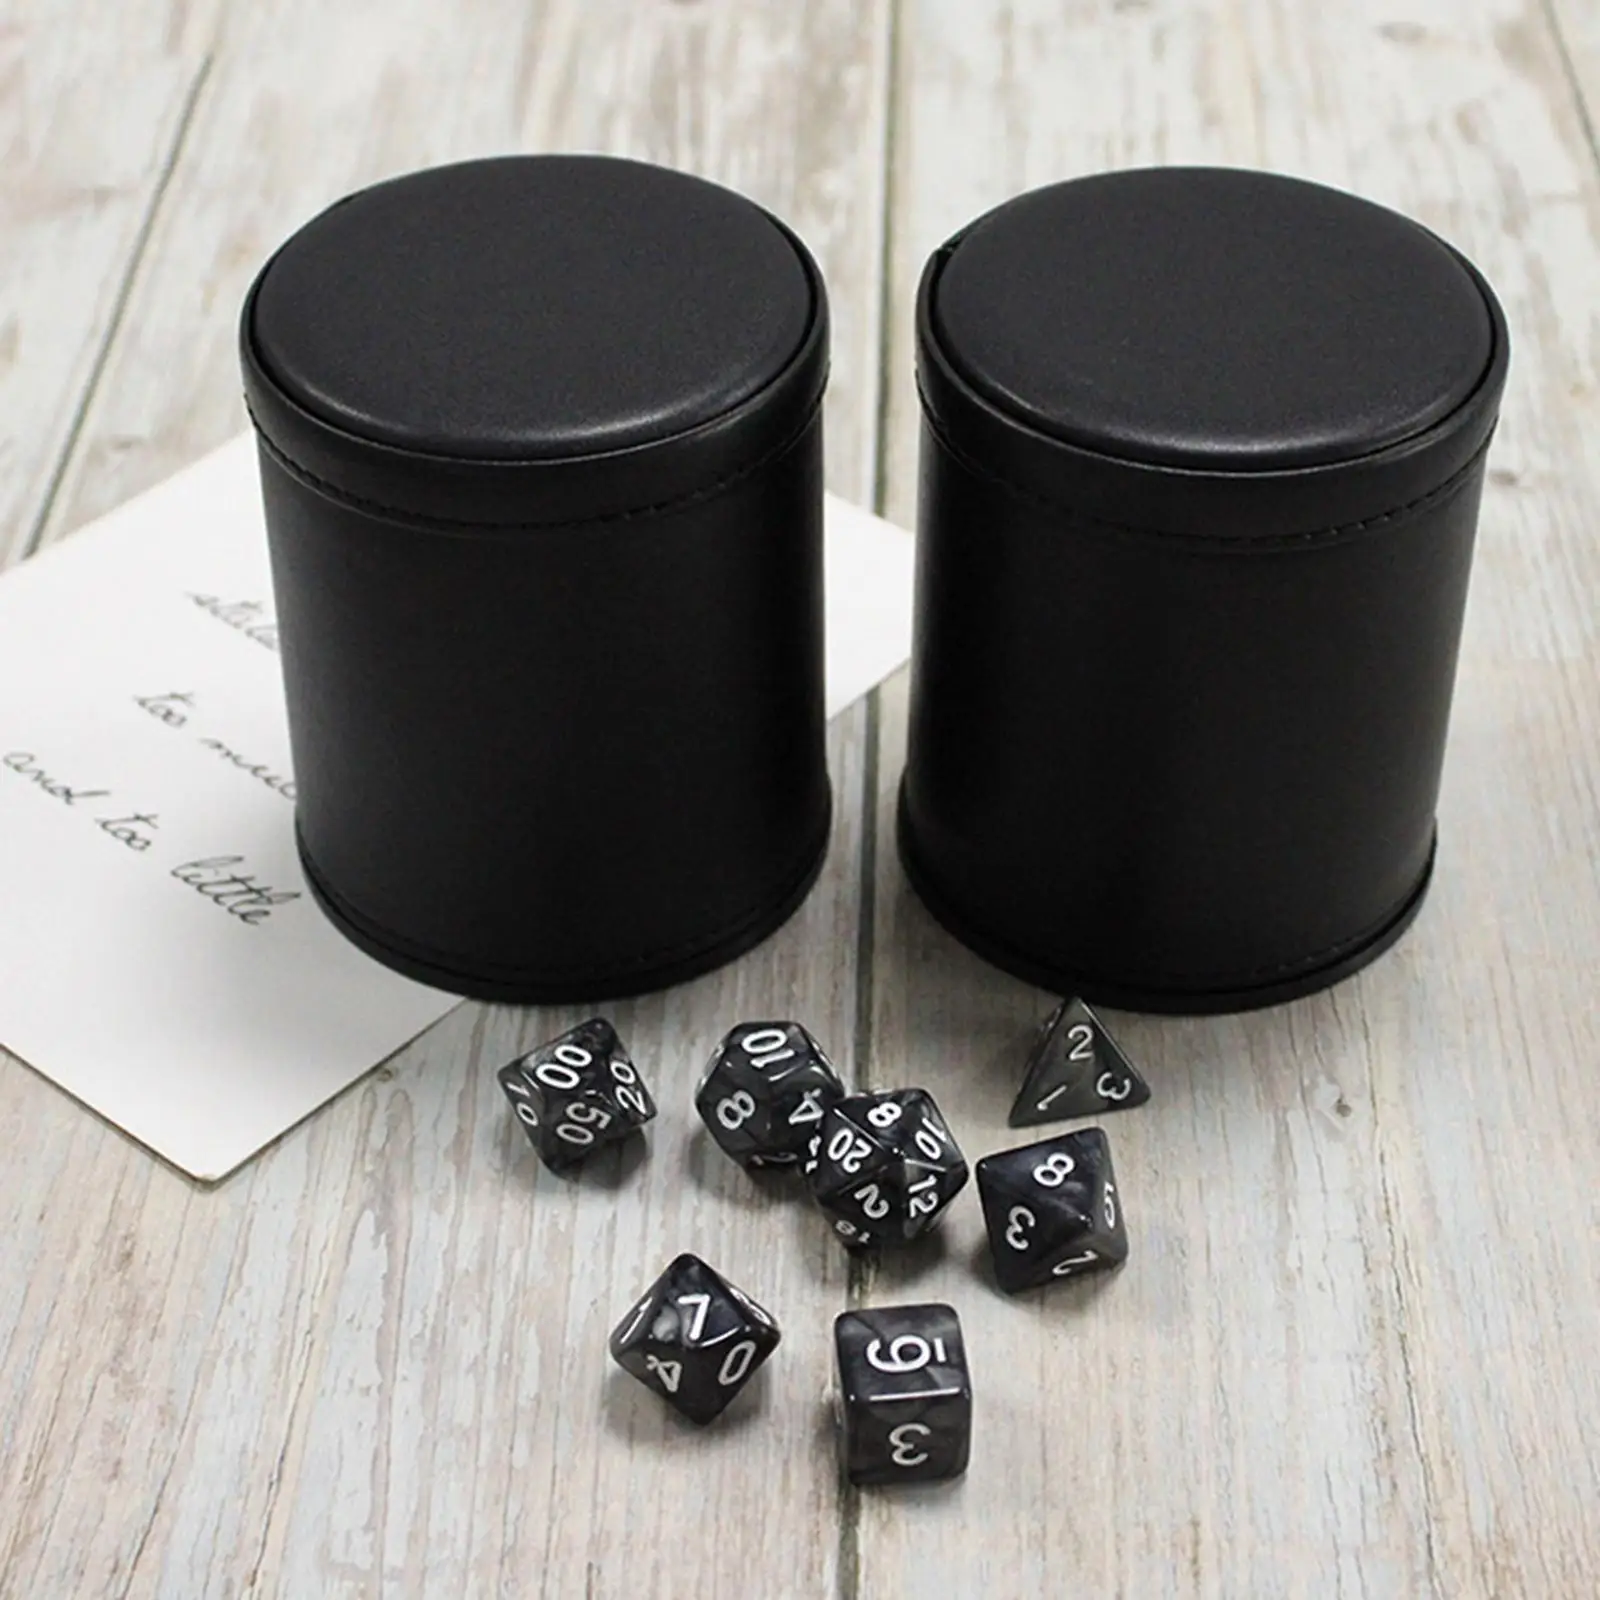 Manual Dice Cup Dice Game Accessories Entertainment Leather Dice Decider Dice Box Dice Shaker for Club Ktv Bar Party Home